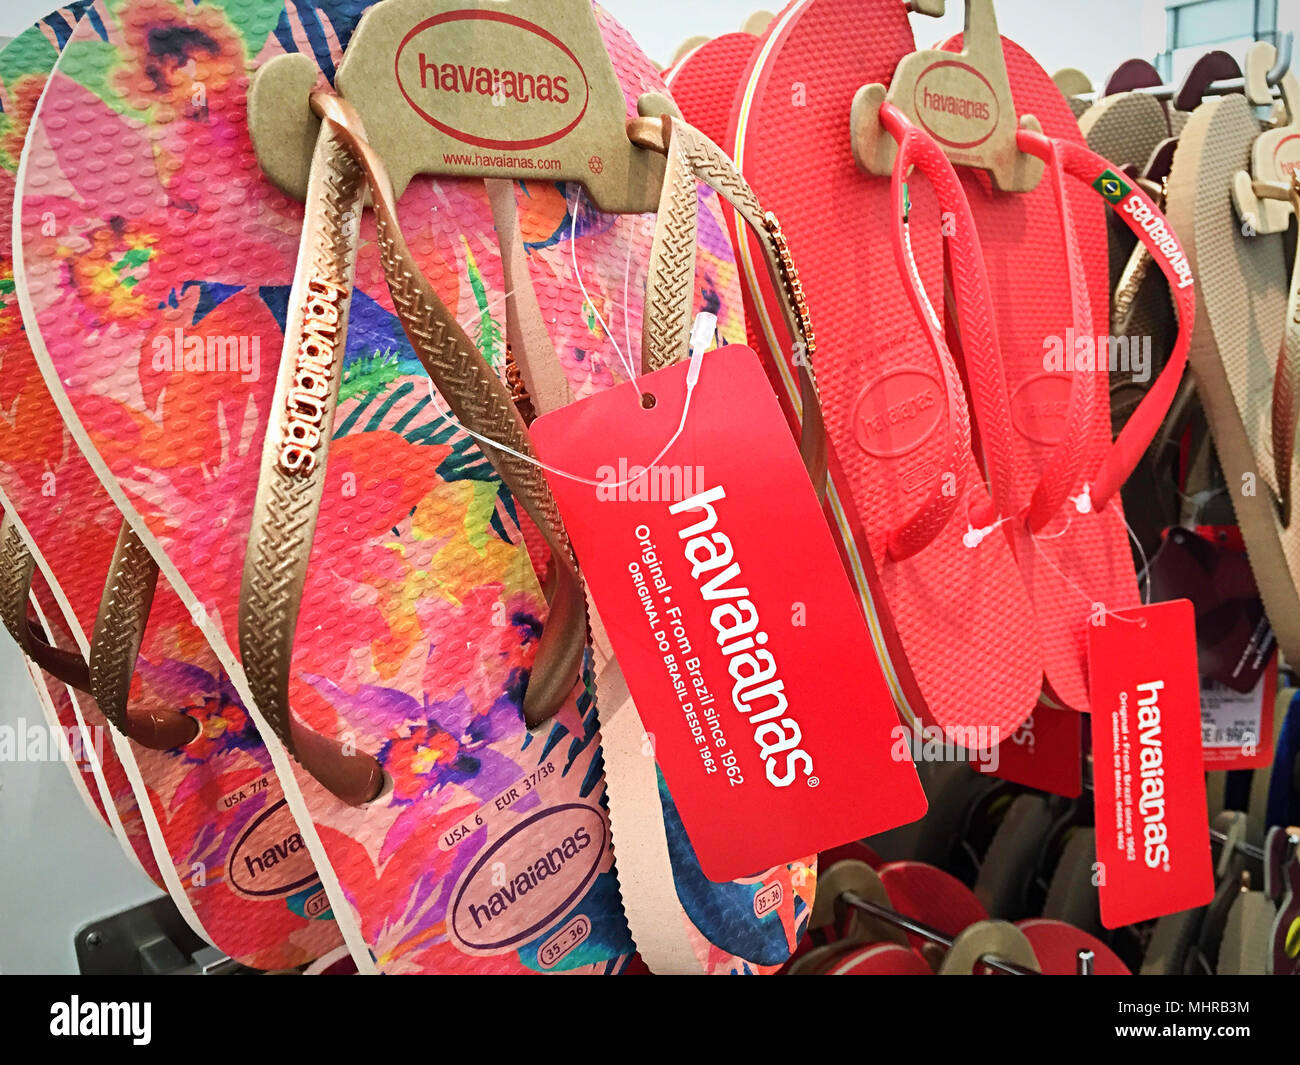 Havaianas Flip Flops Anzeige an Lord & Taylor in New York City, USA Stockfoto